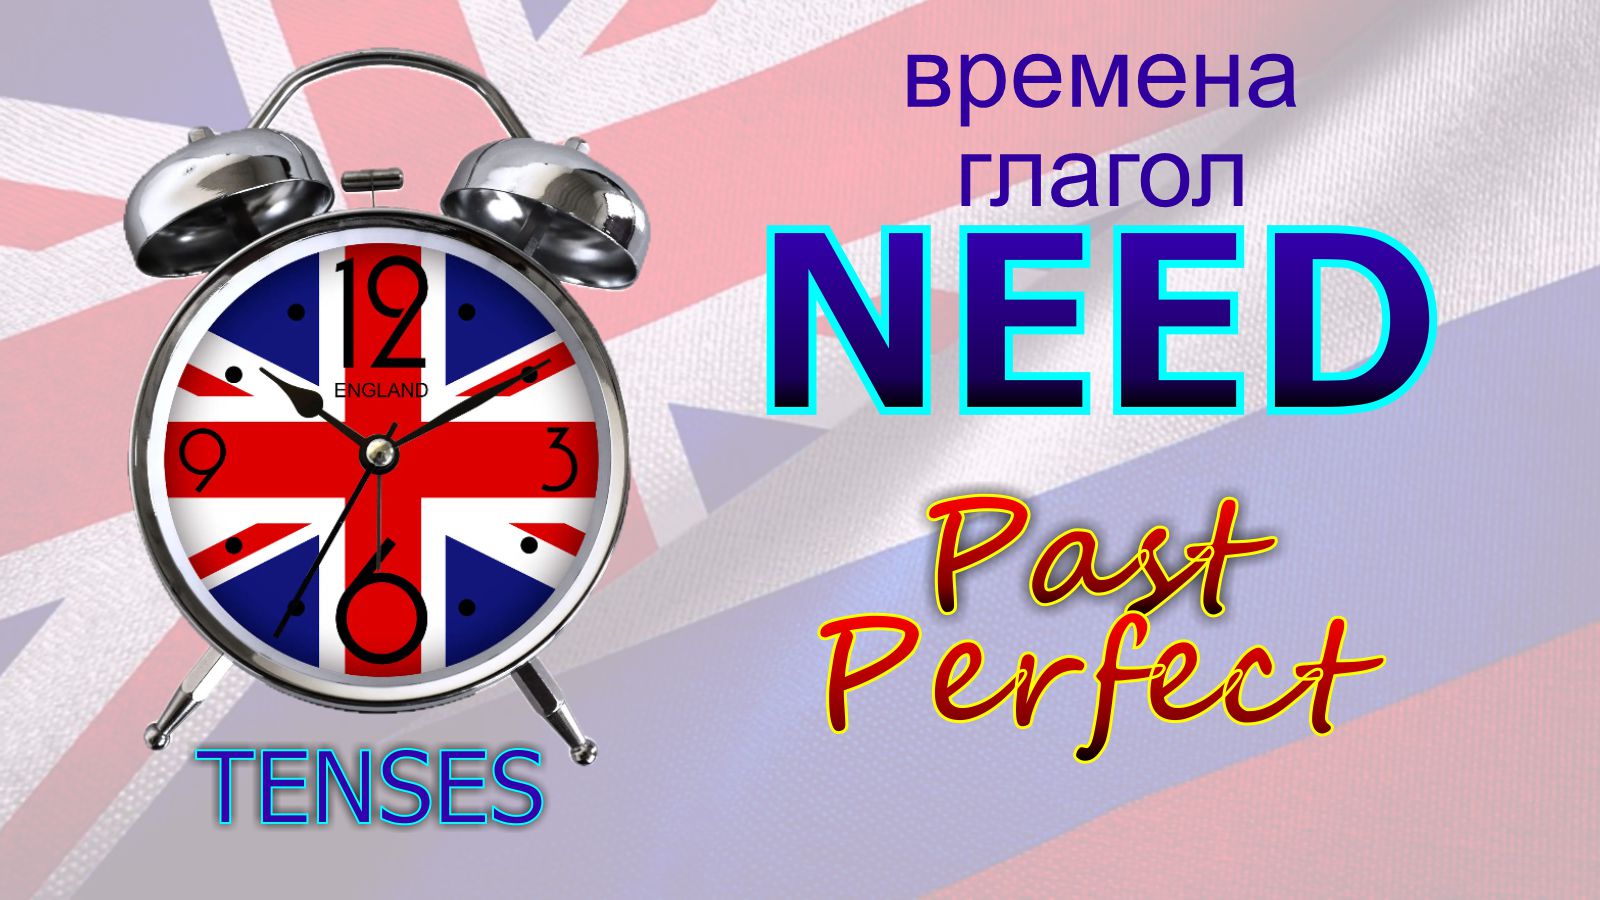 Времена. Глагол to NEED. Past Perfect